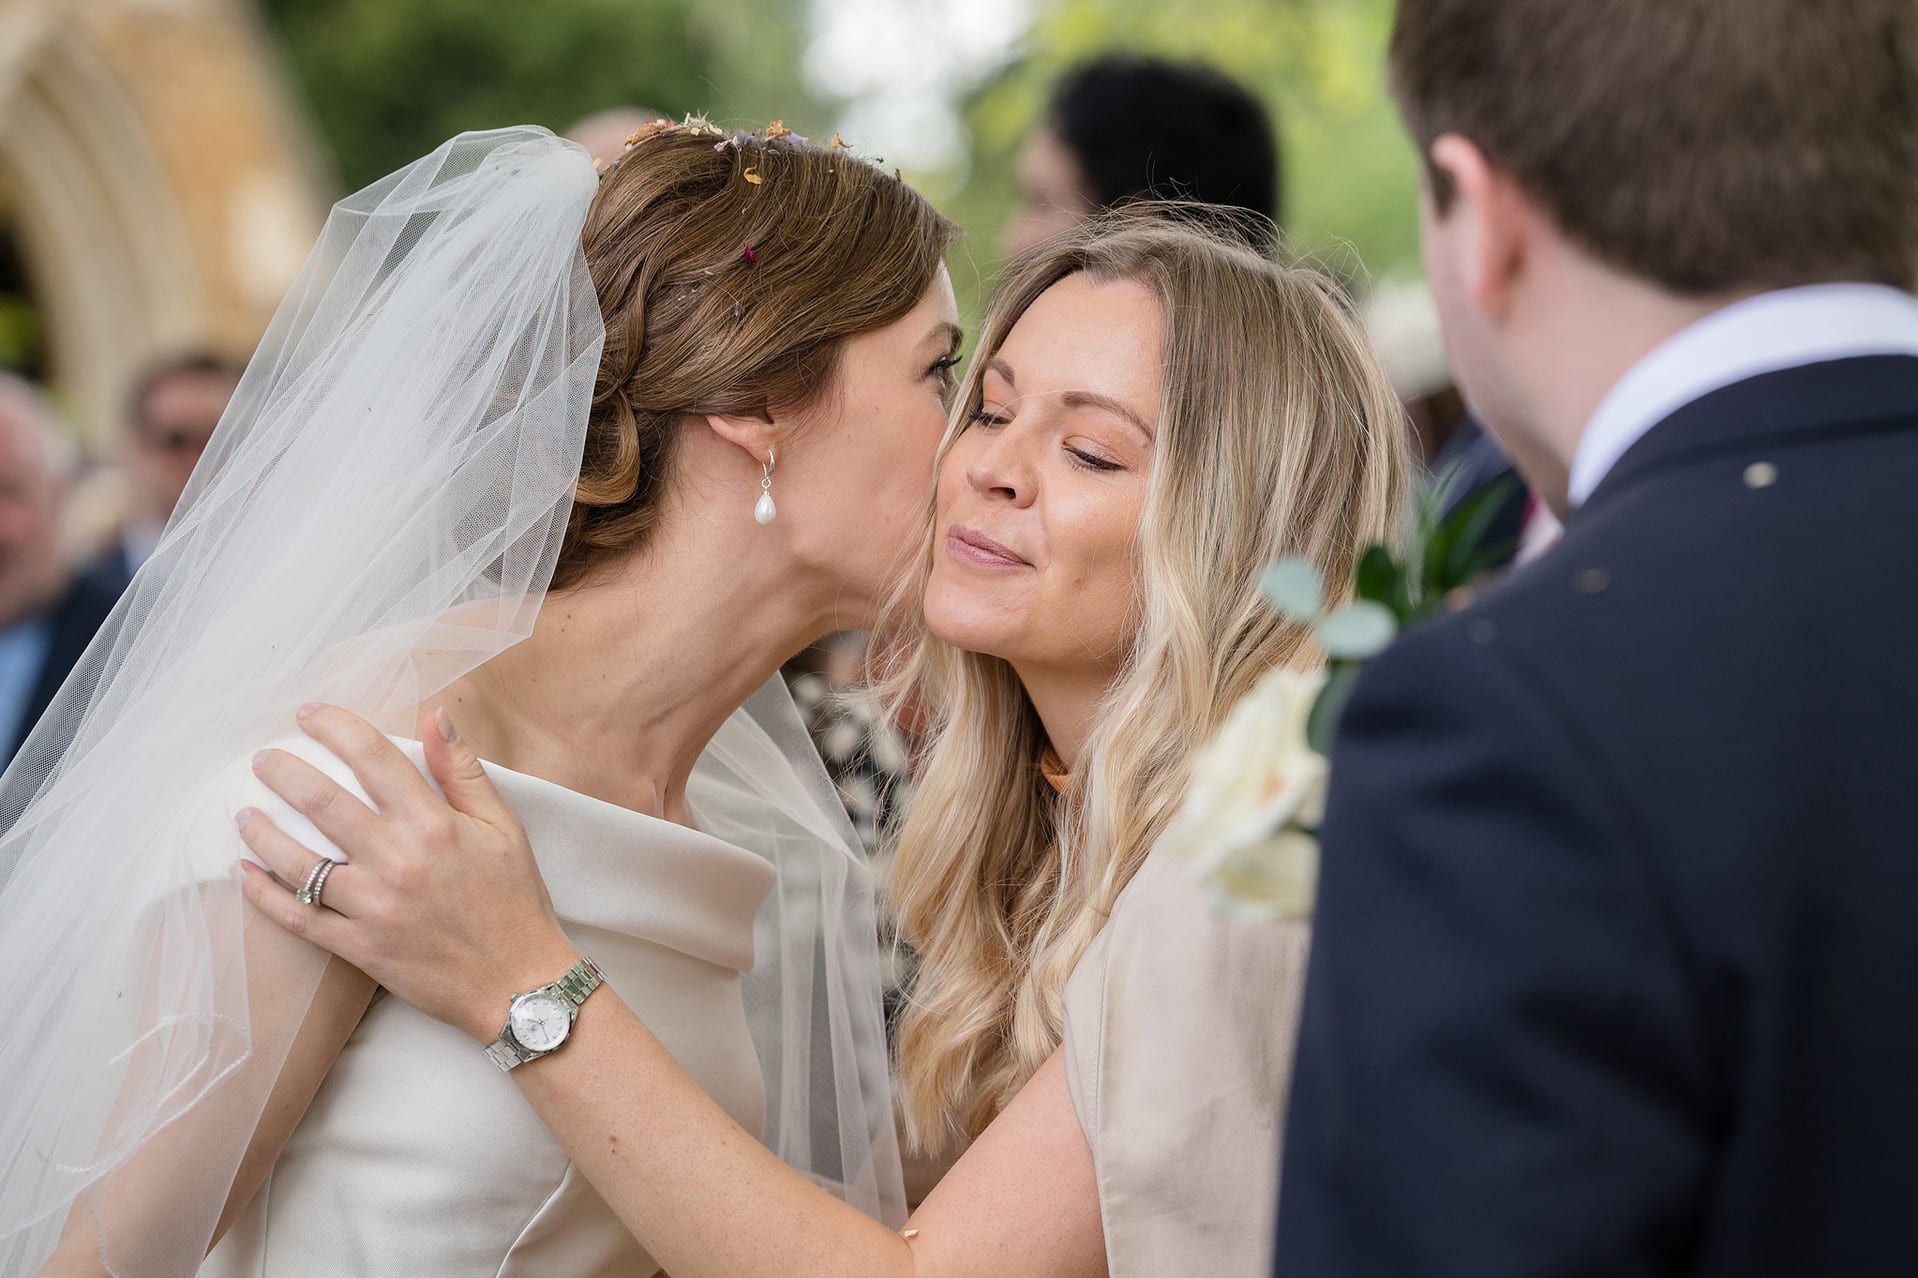 A wedding guest kissing the bride in congratulations